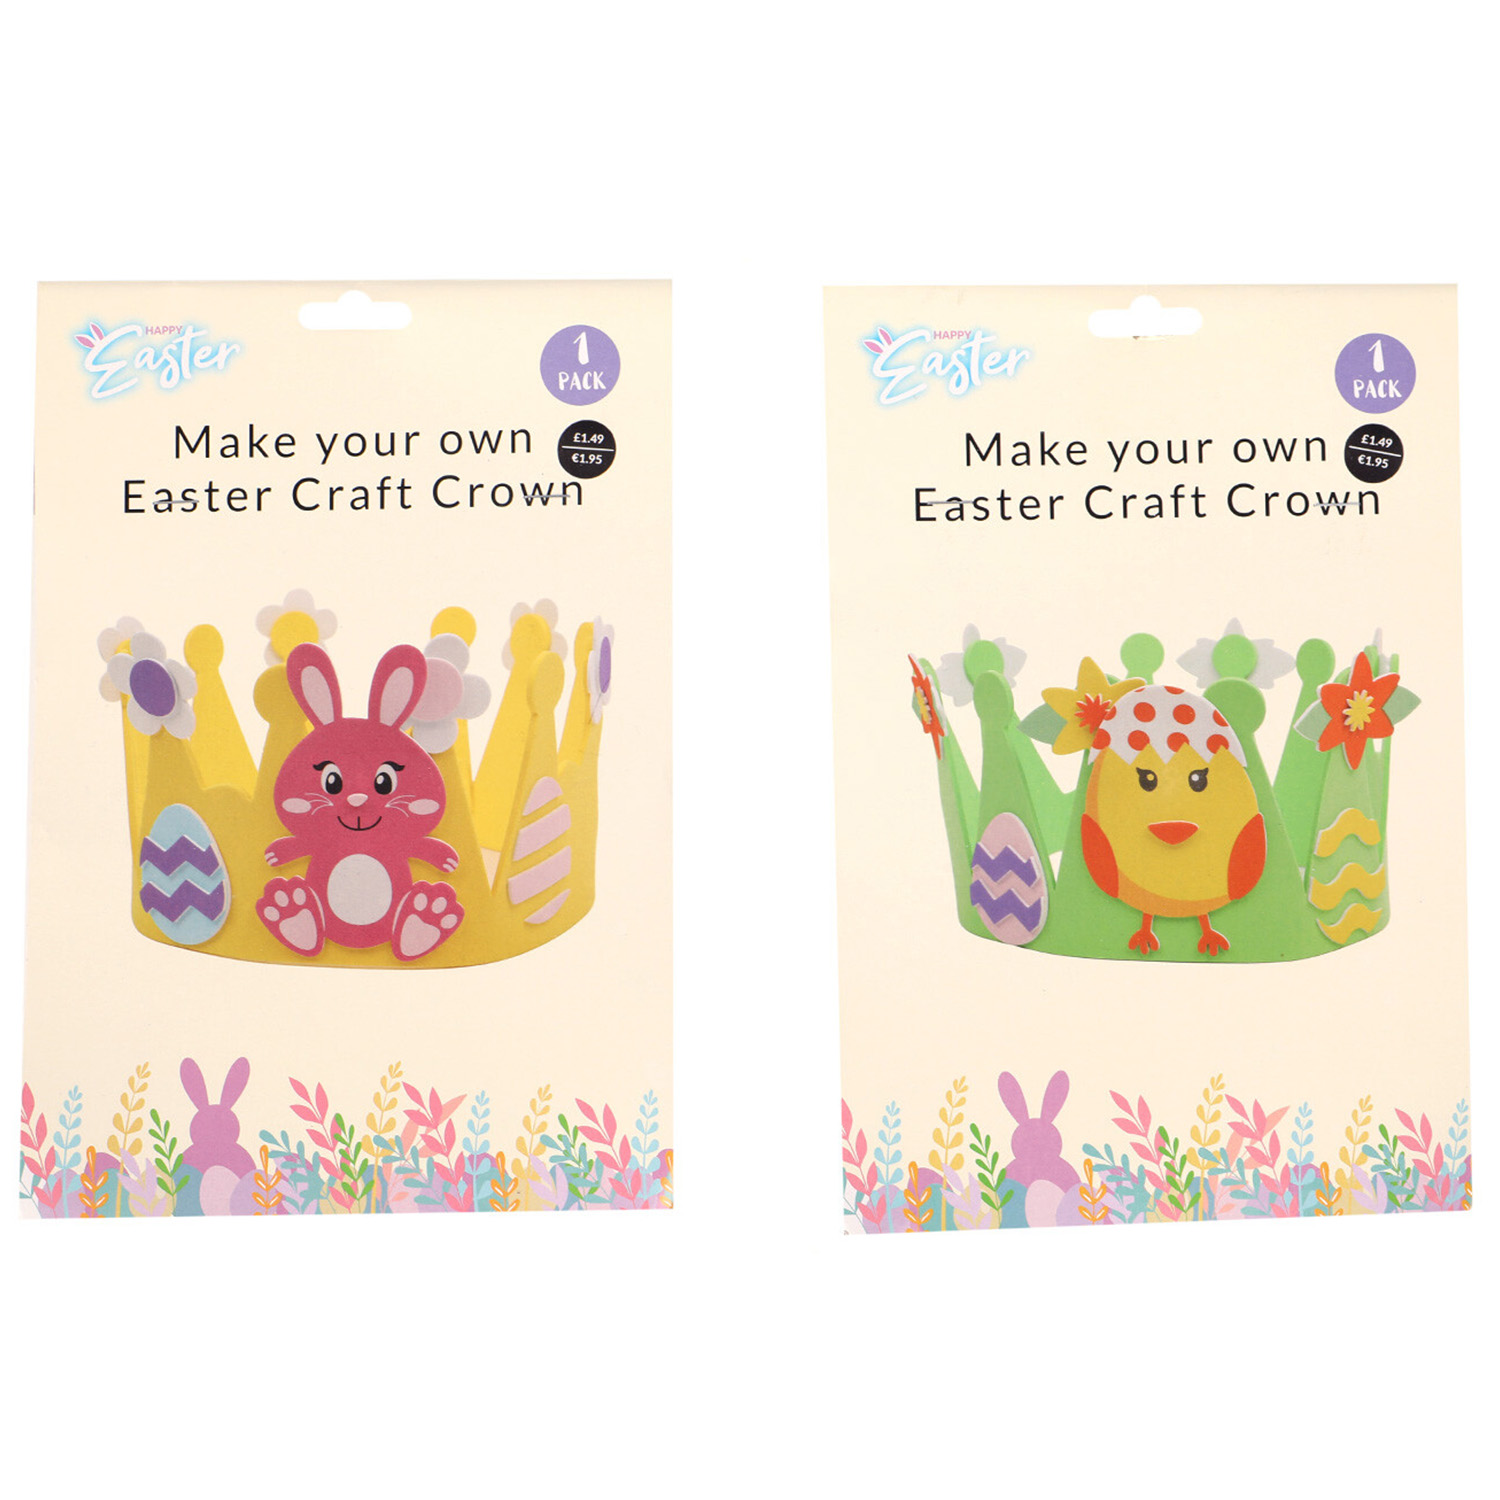 Make Your Own Easter Craft Crown Image 1